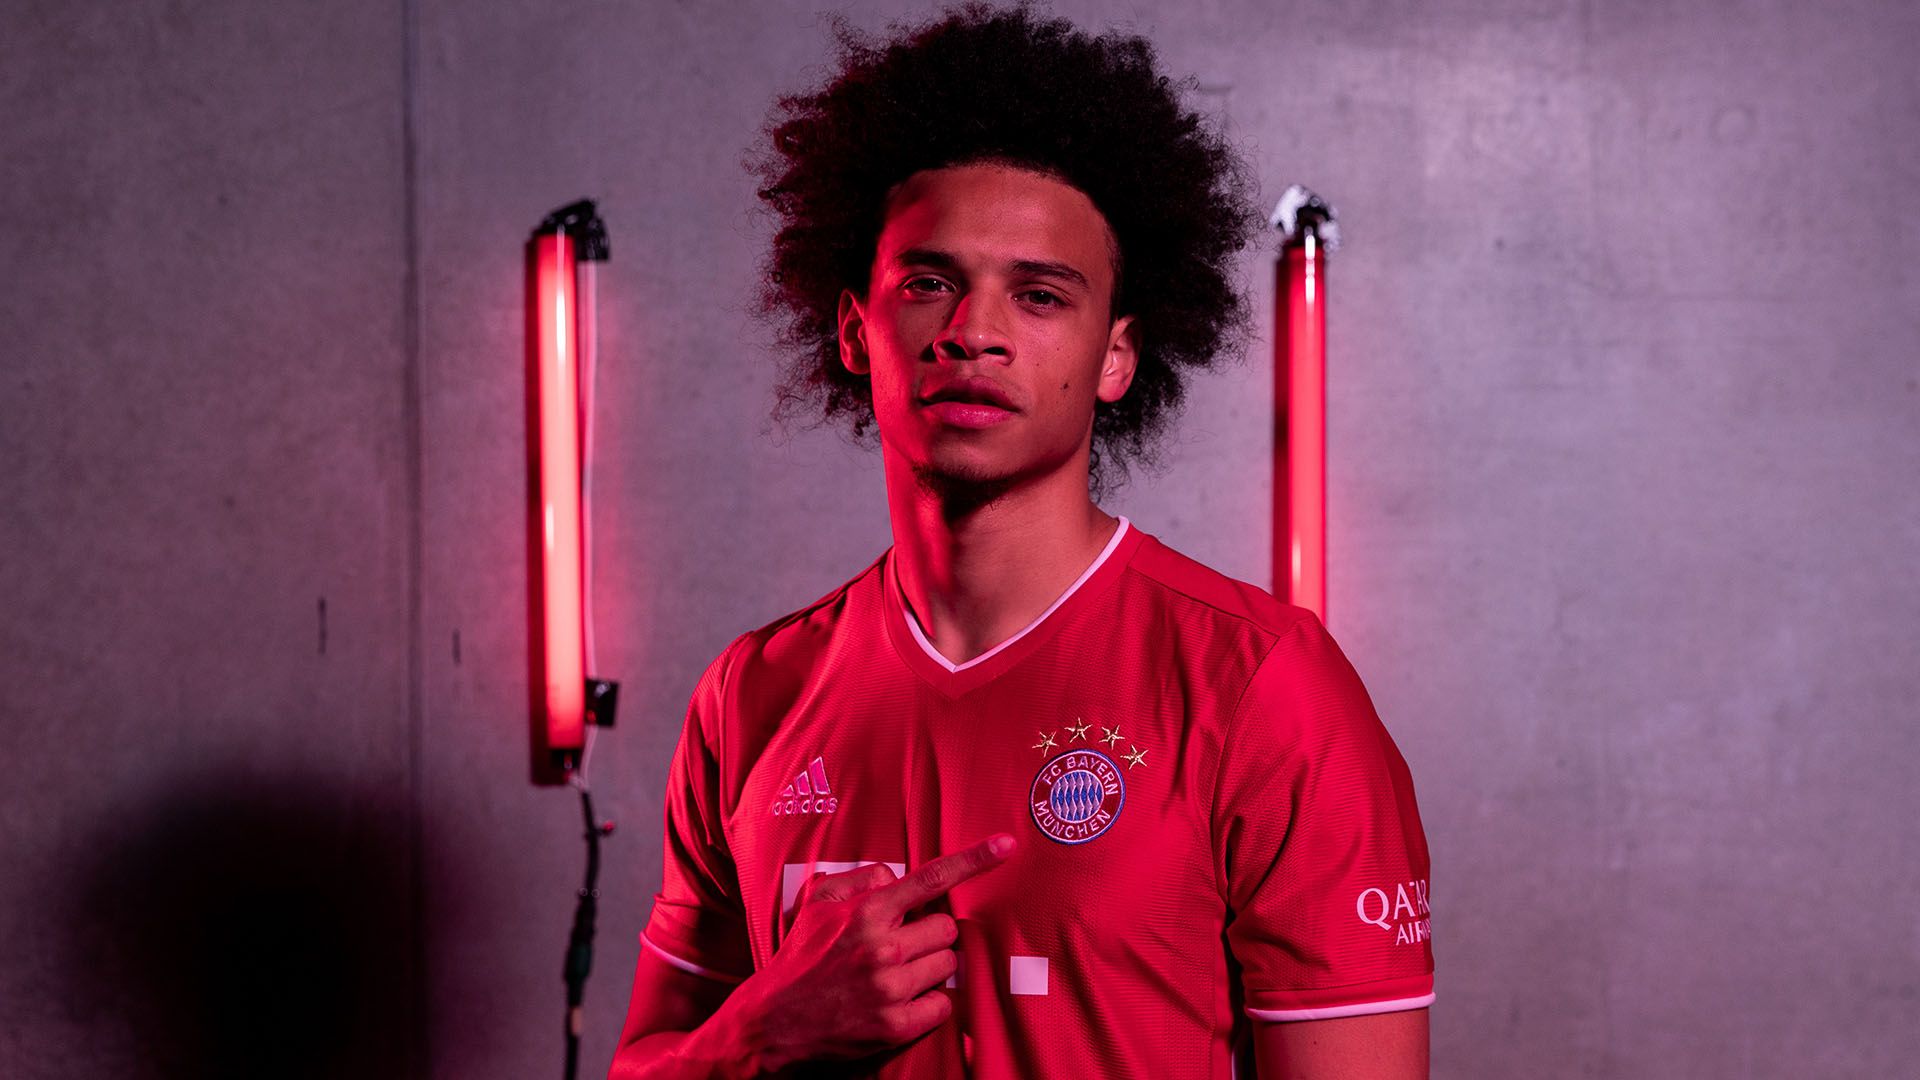 Leroy Sané to wear the number 10 shirt